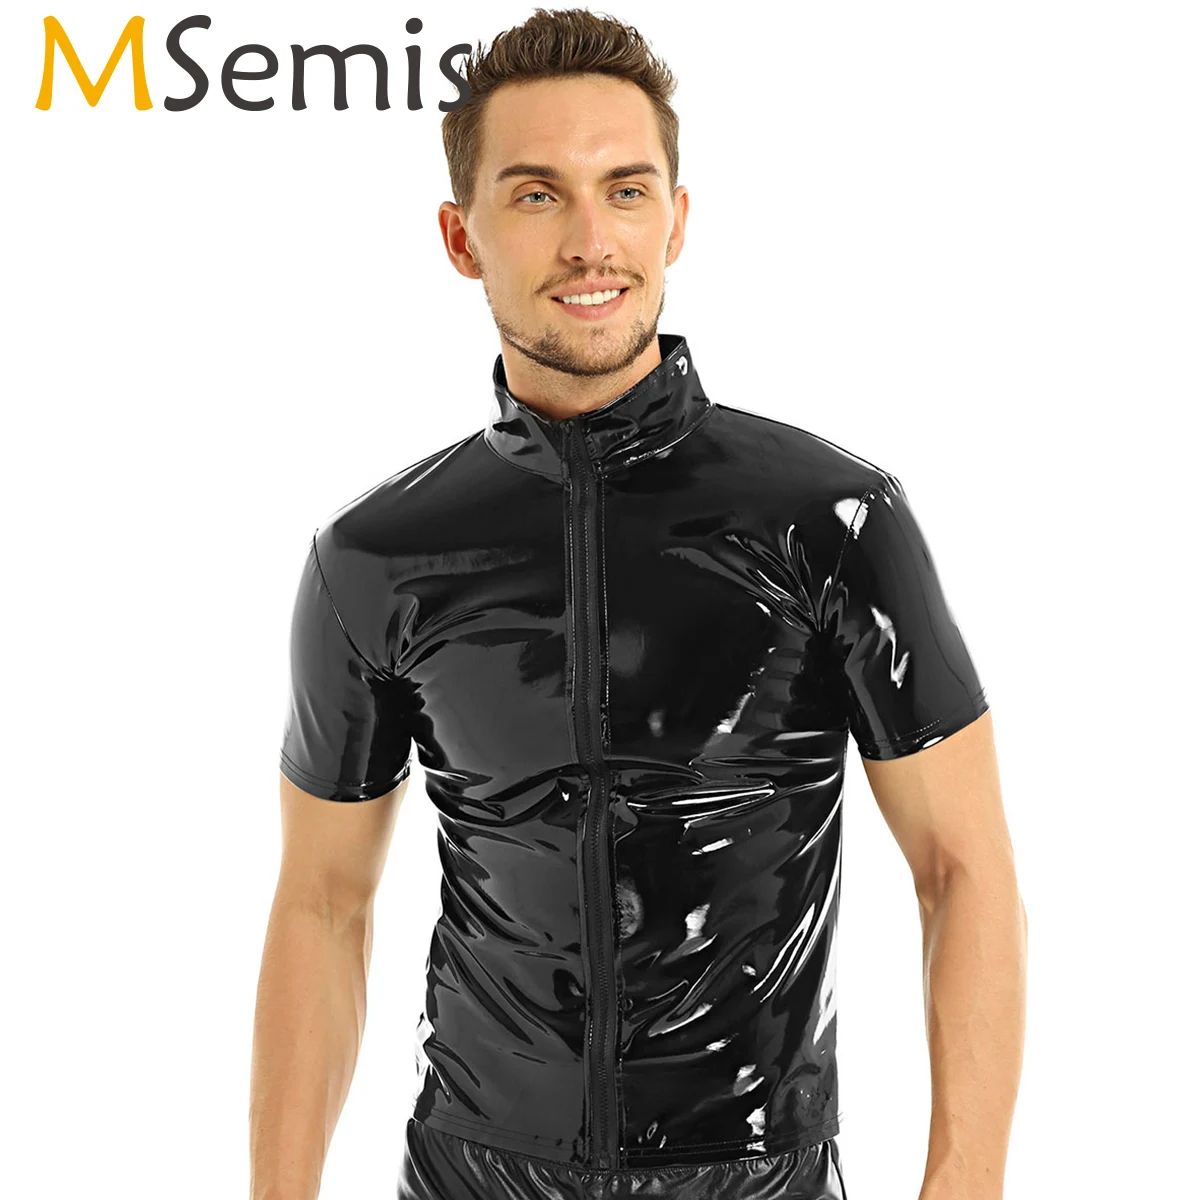 MSemis Unisex Men Metallic Leather Top Sexy Muscle Gay T-shirt Hipster Front Zip Up Shirt Tops Stage Party Clubwear Costumes